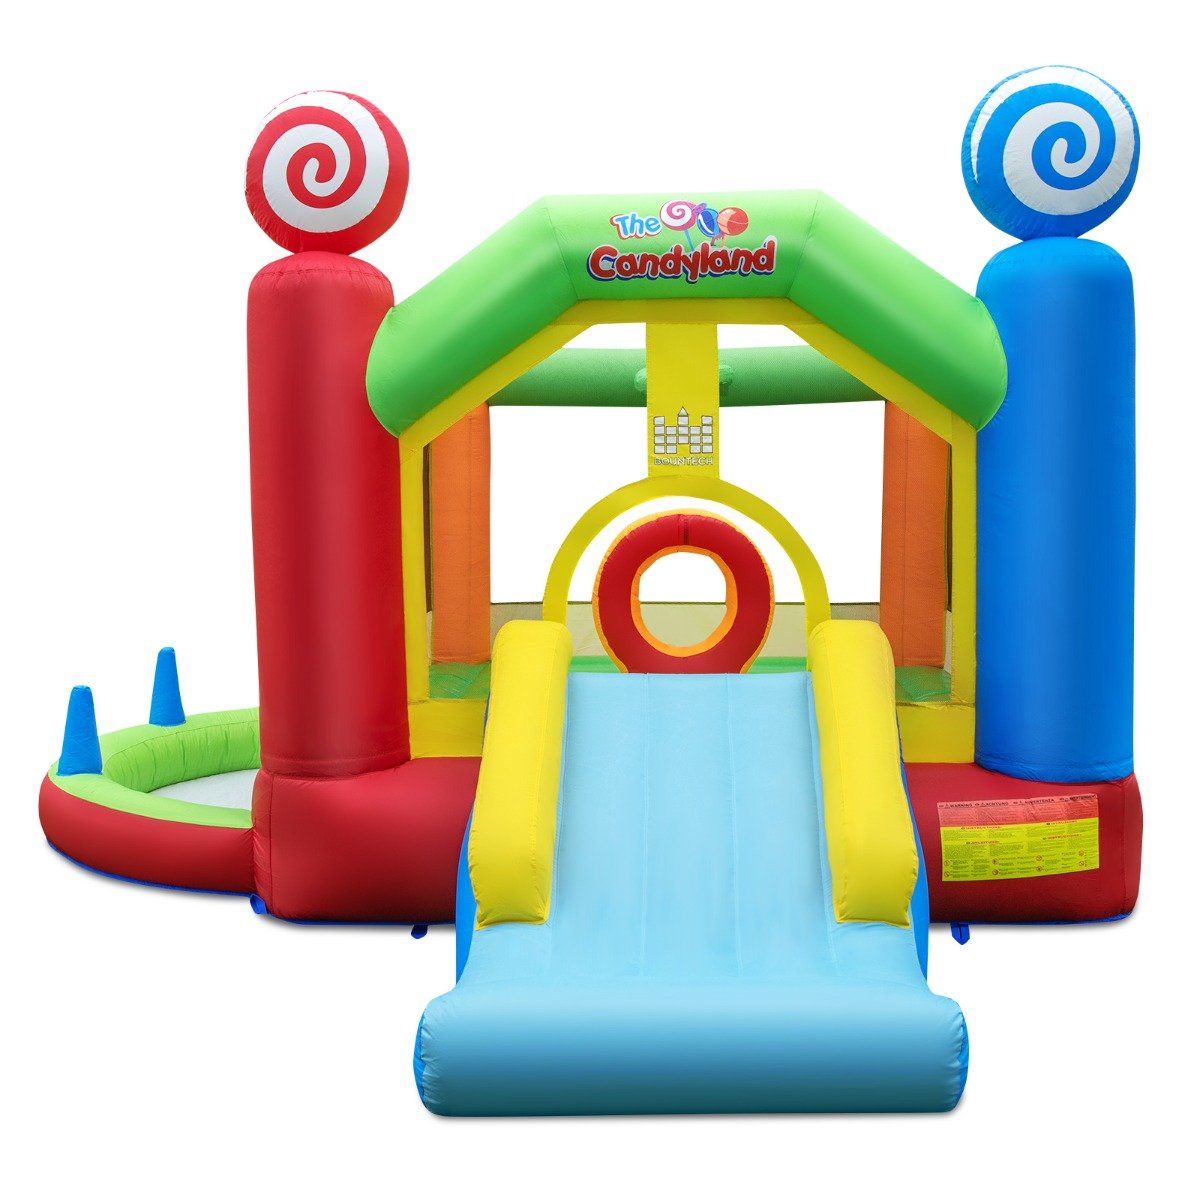 Unleash Excitement with the Candy Land Inflatable Bouncer